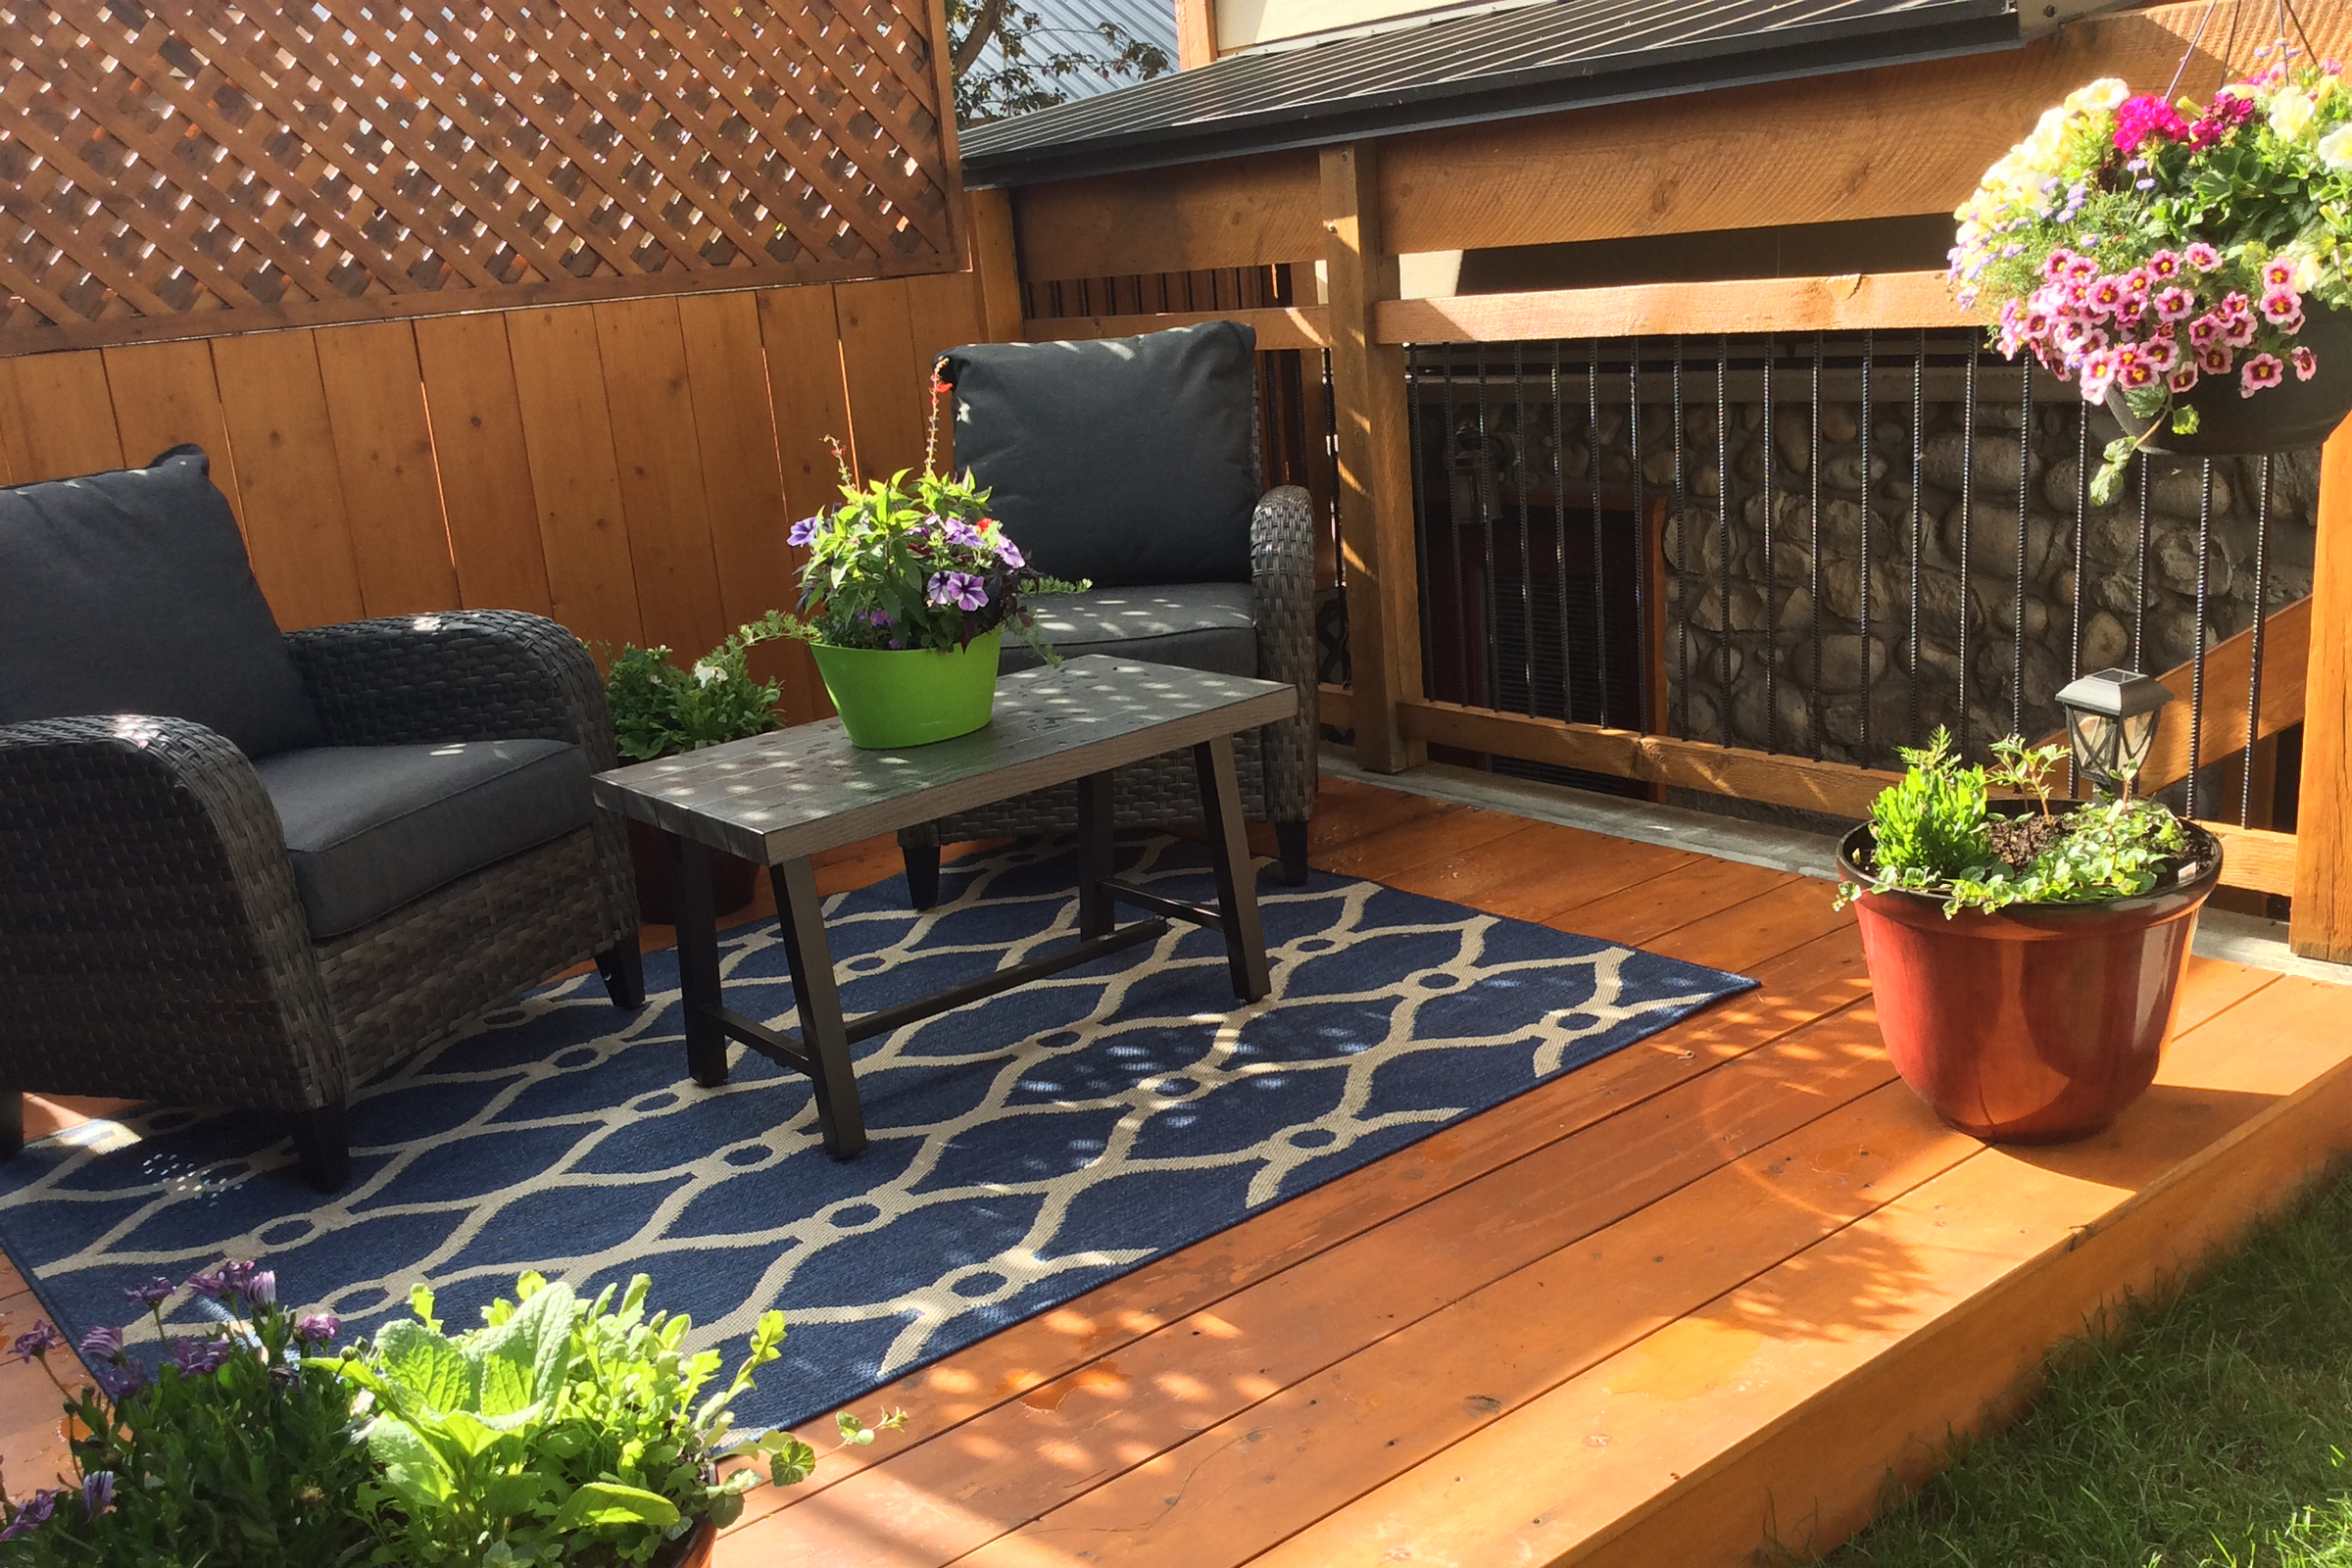 Backyard porch with navy lawn furniture and potted plants.